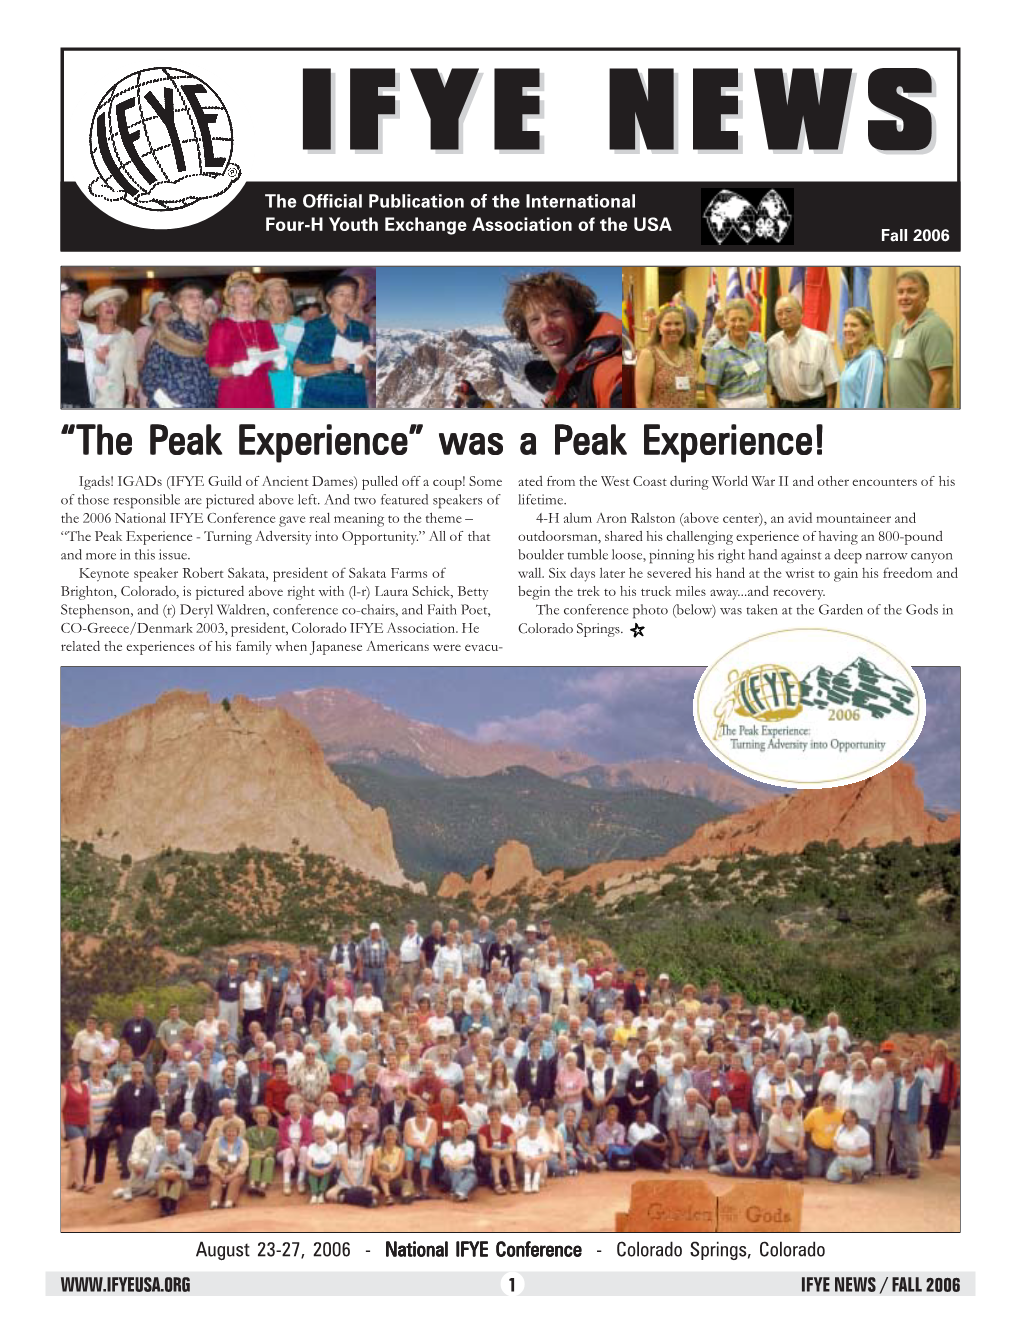 IFYE NEWSNEWS the Official Publication of the International Four-H Youth Exchange Association of the USA Fall 2006